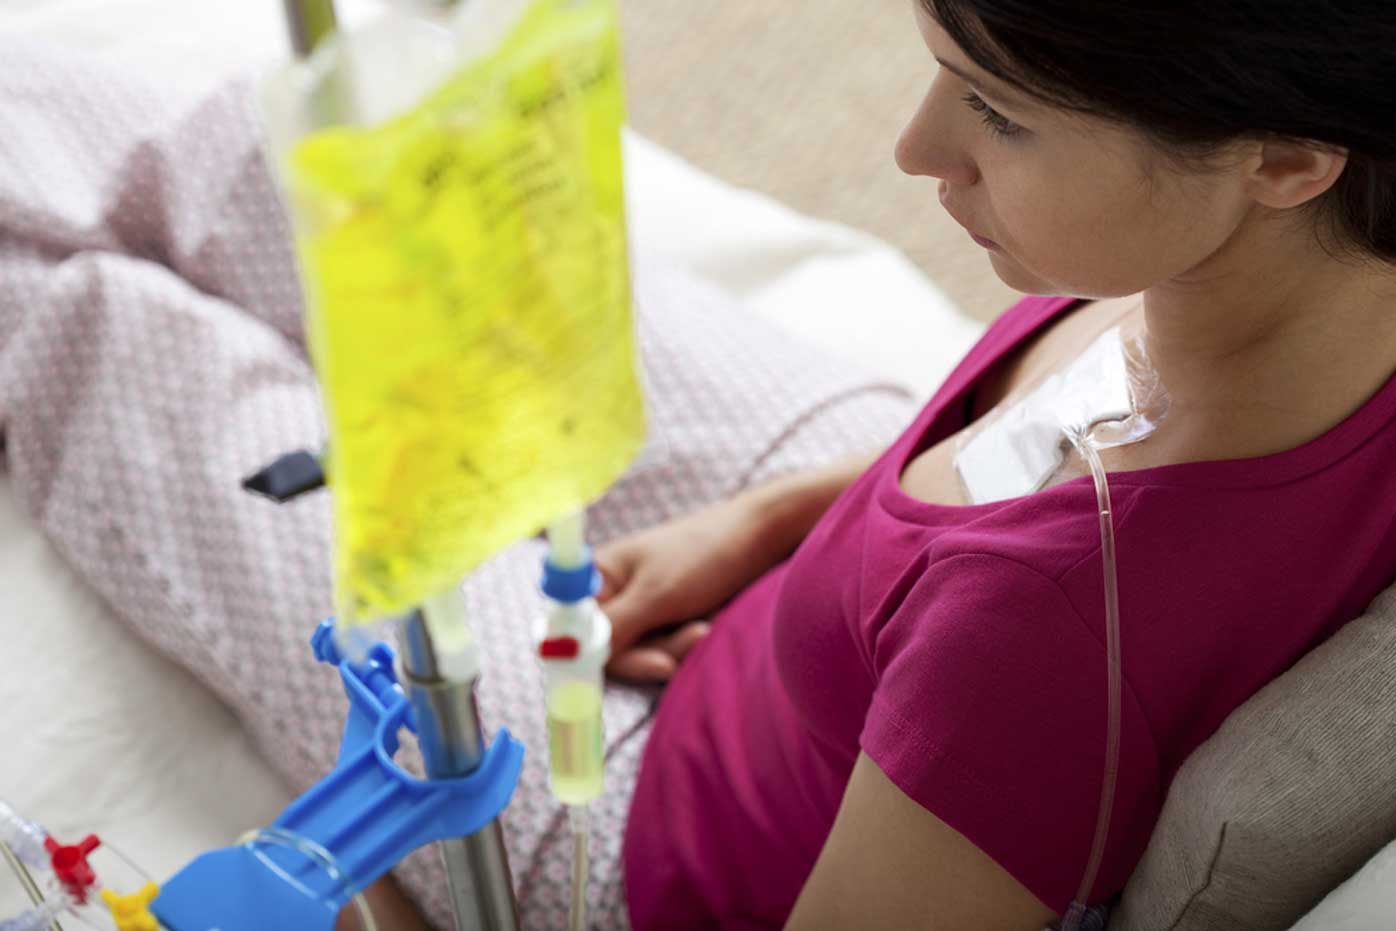 A patient reclines as she receives chemotherapy to treat cancer